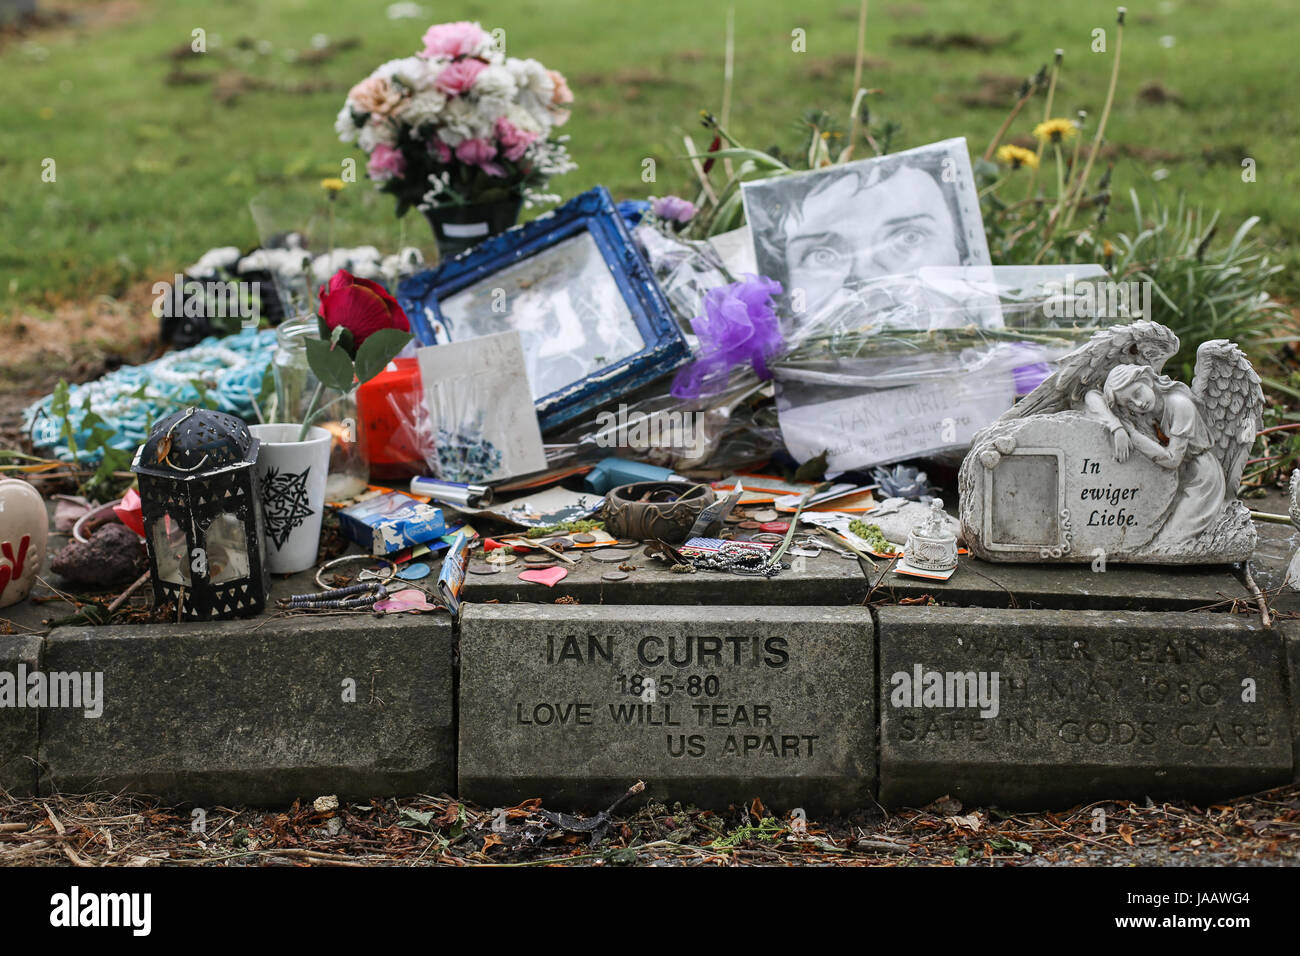 Ian Curtis' memorial stone at  Macclesfield Crematorium in Macclesfield, Cheshire, UK. The English singer-songwriter and musician was best known as th Stock Photo